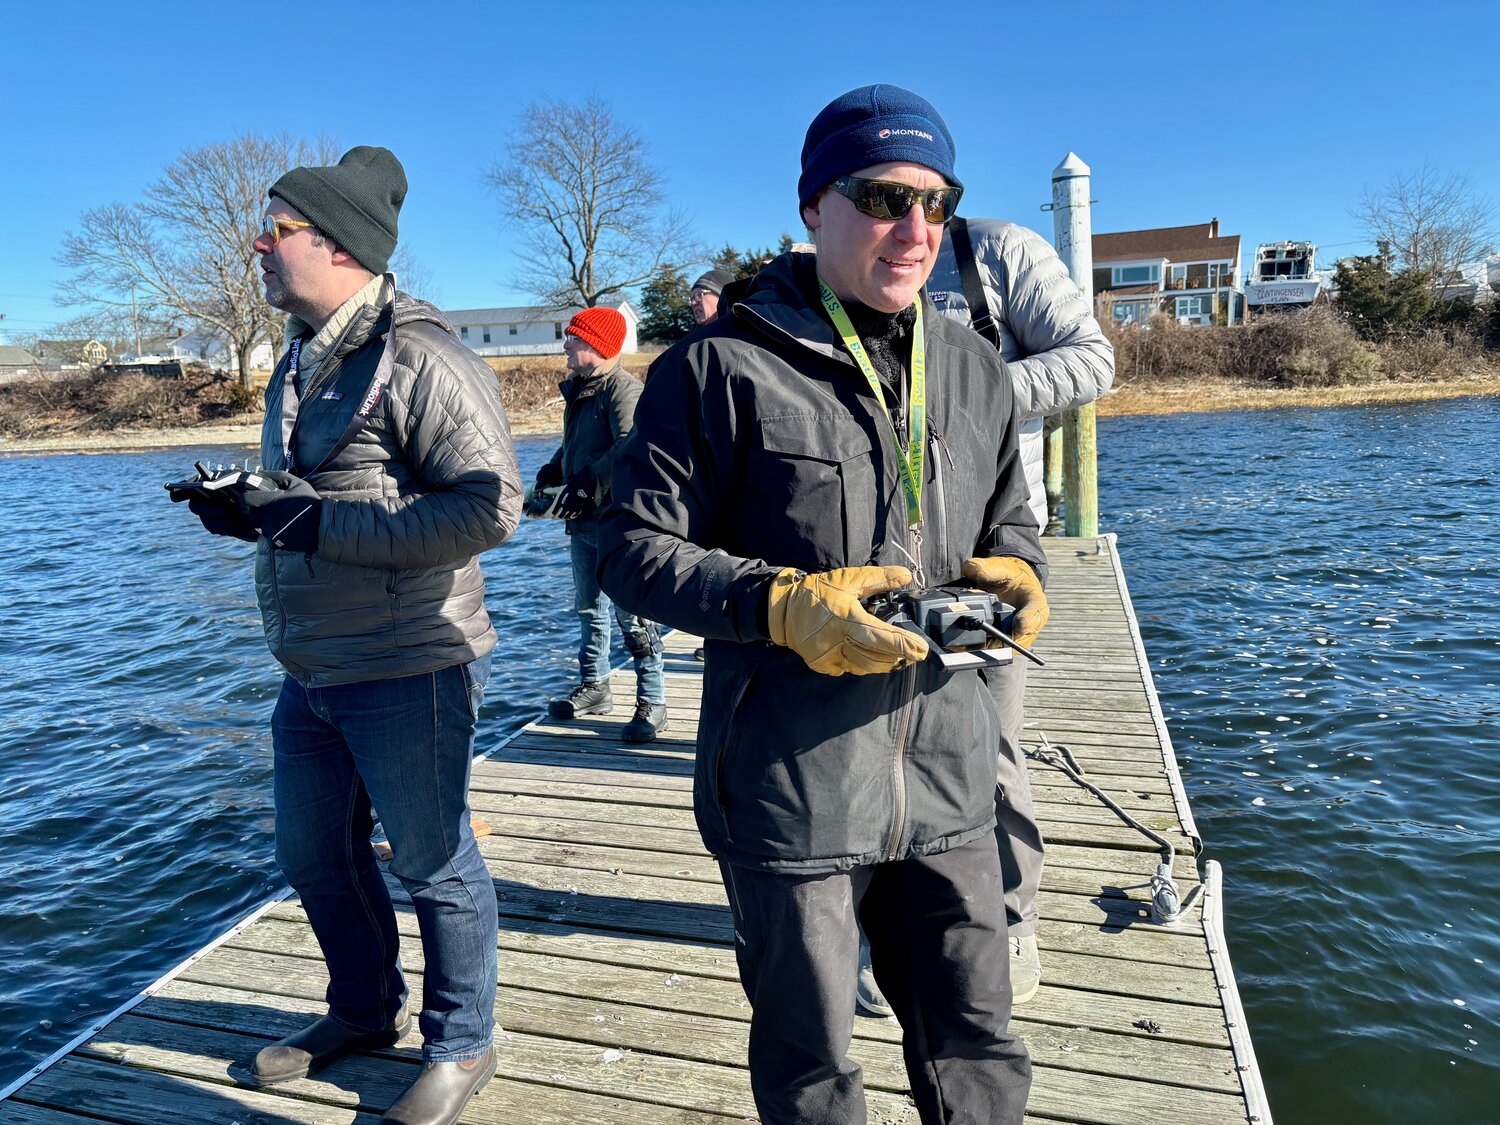 Jon Buonaccorsi (left) and Mike Sarnowski work their controls while guiding their model sailboats at the end of the pier behind Sunset Cove on Sunday.